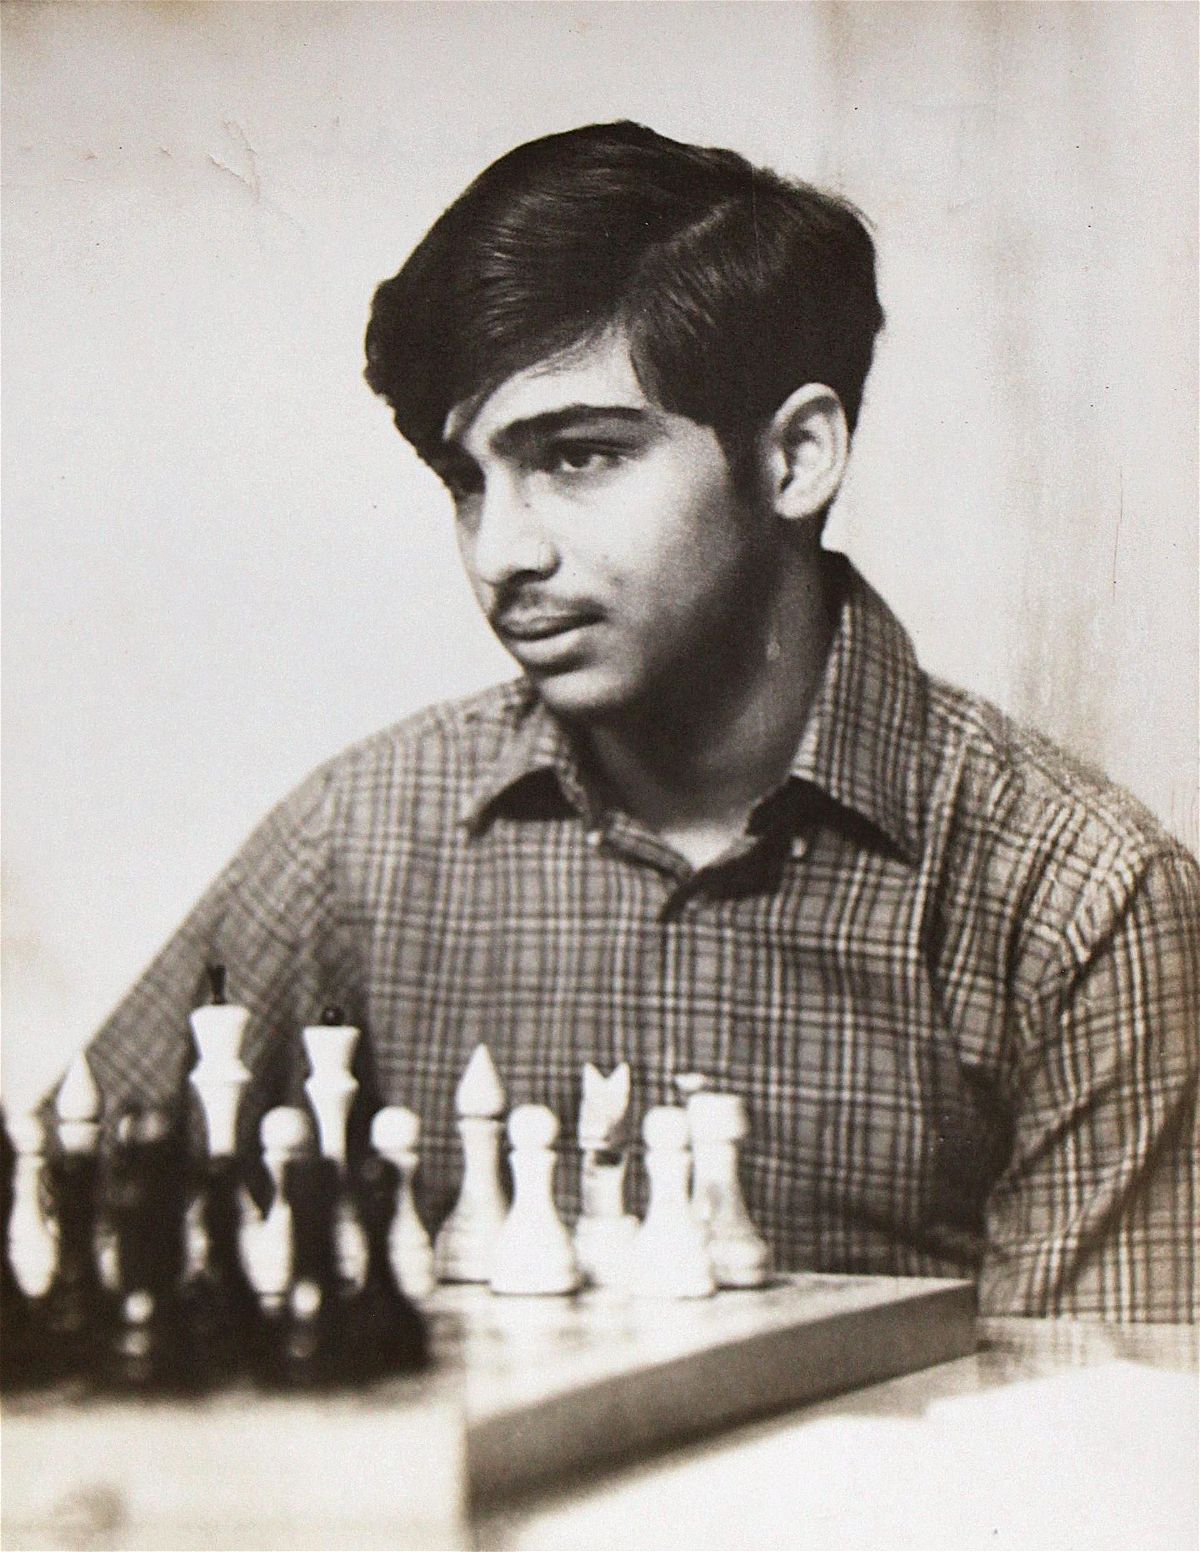 Vishy Anand fears Classical chess could go the Test cricket way; talks  about upcoming film on him